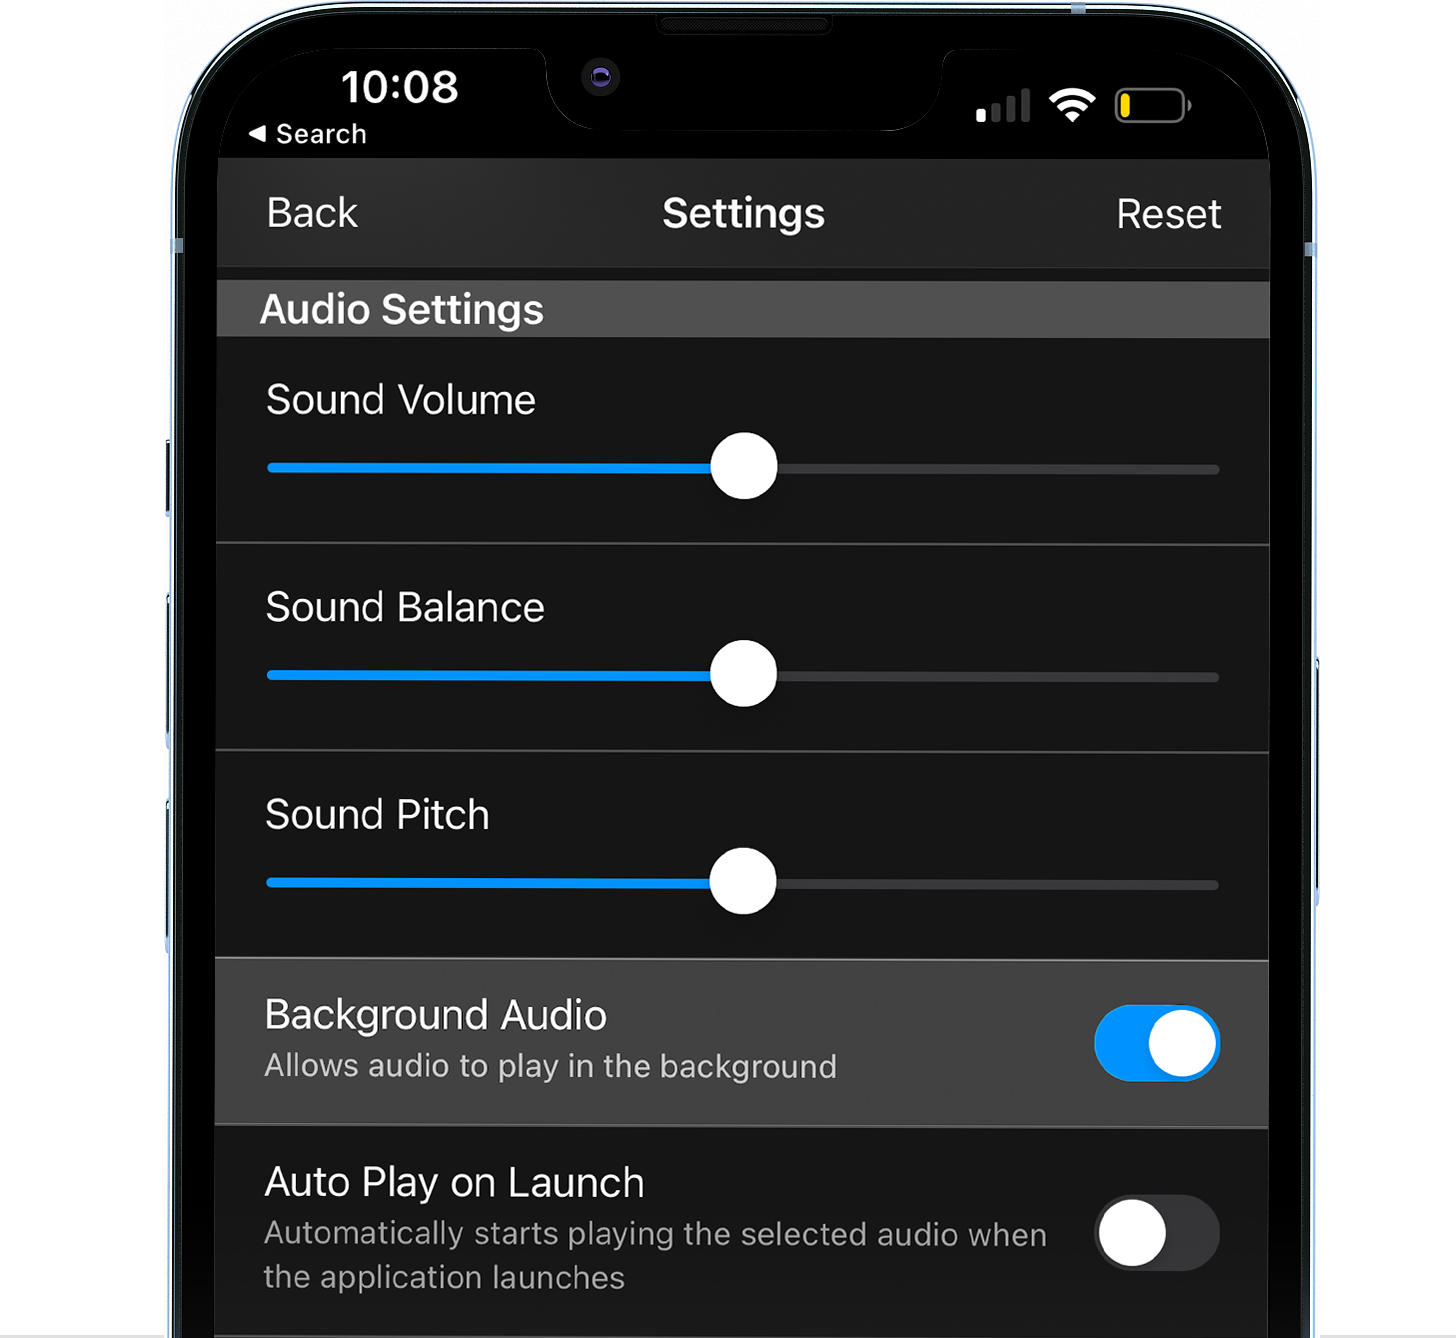 Noisy: My instant buttons for Android - Free App Download